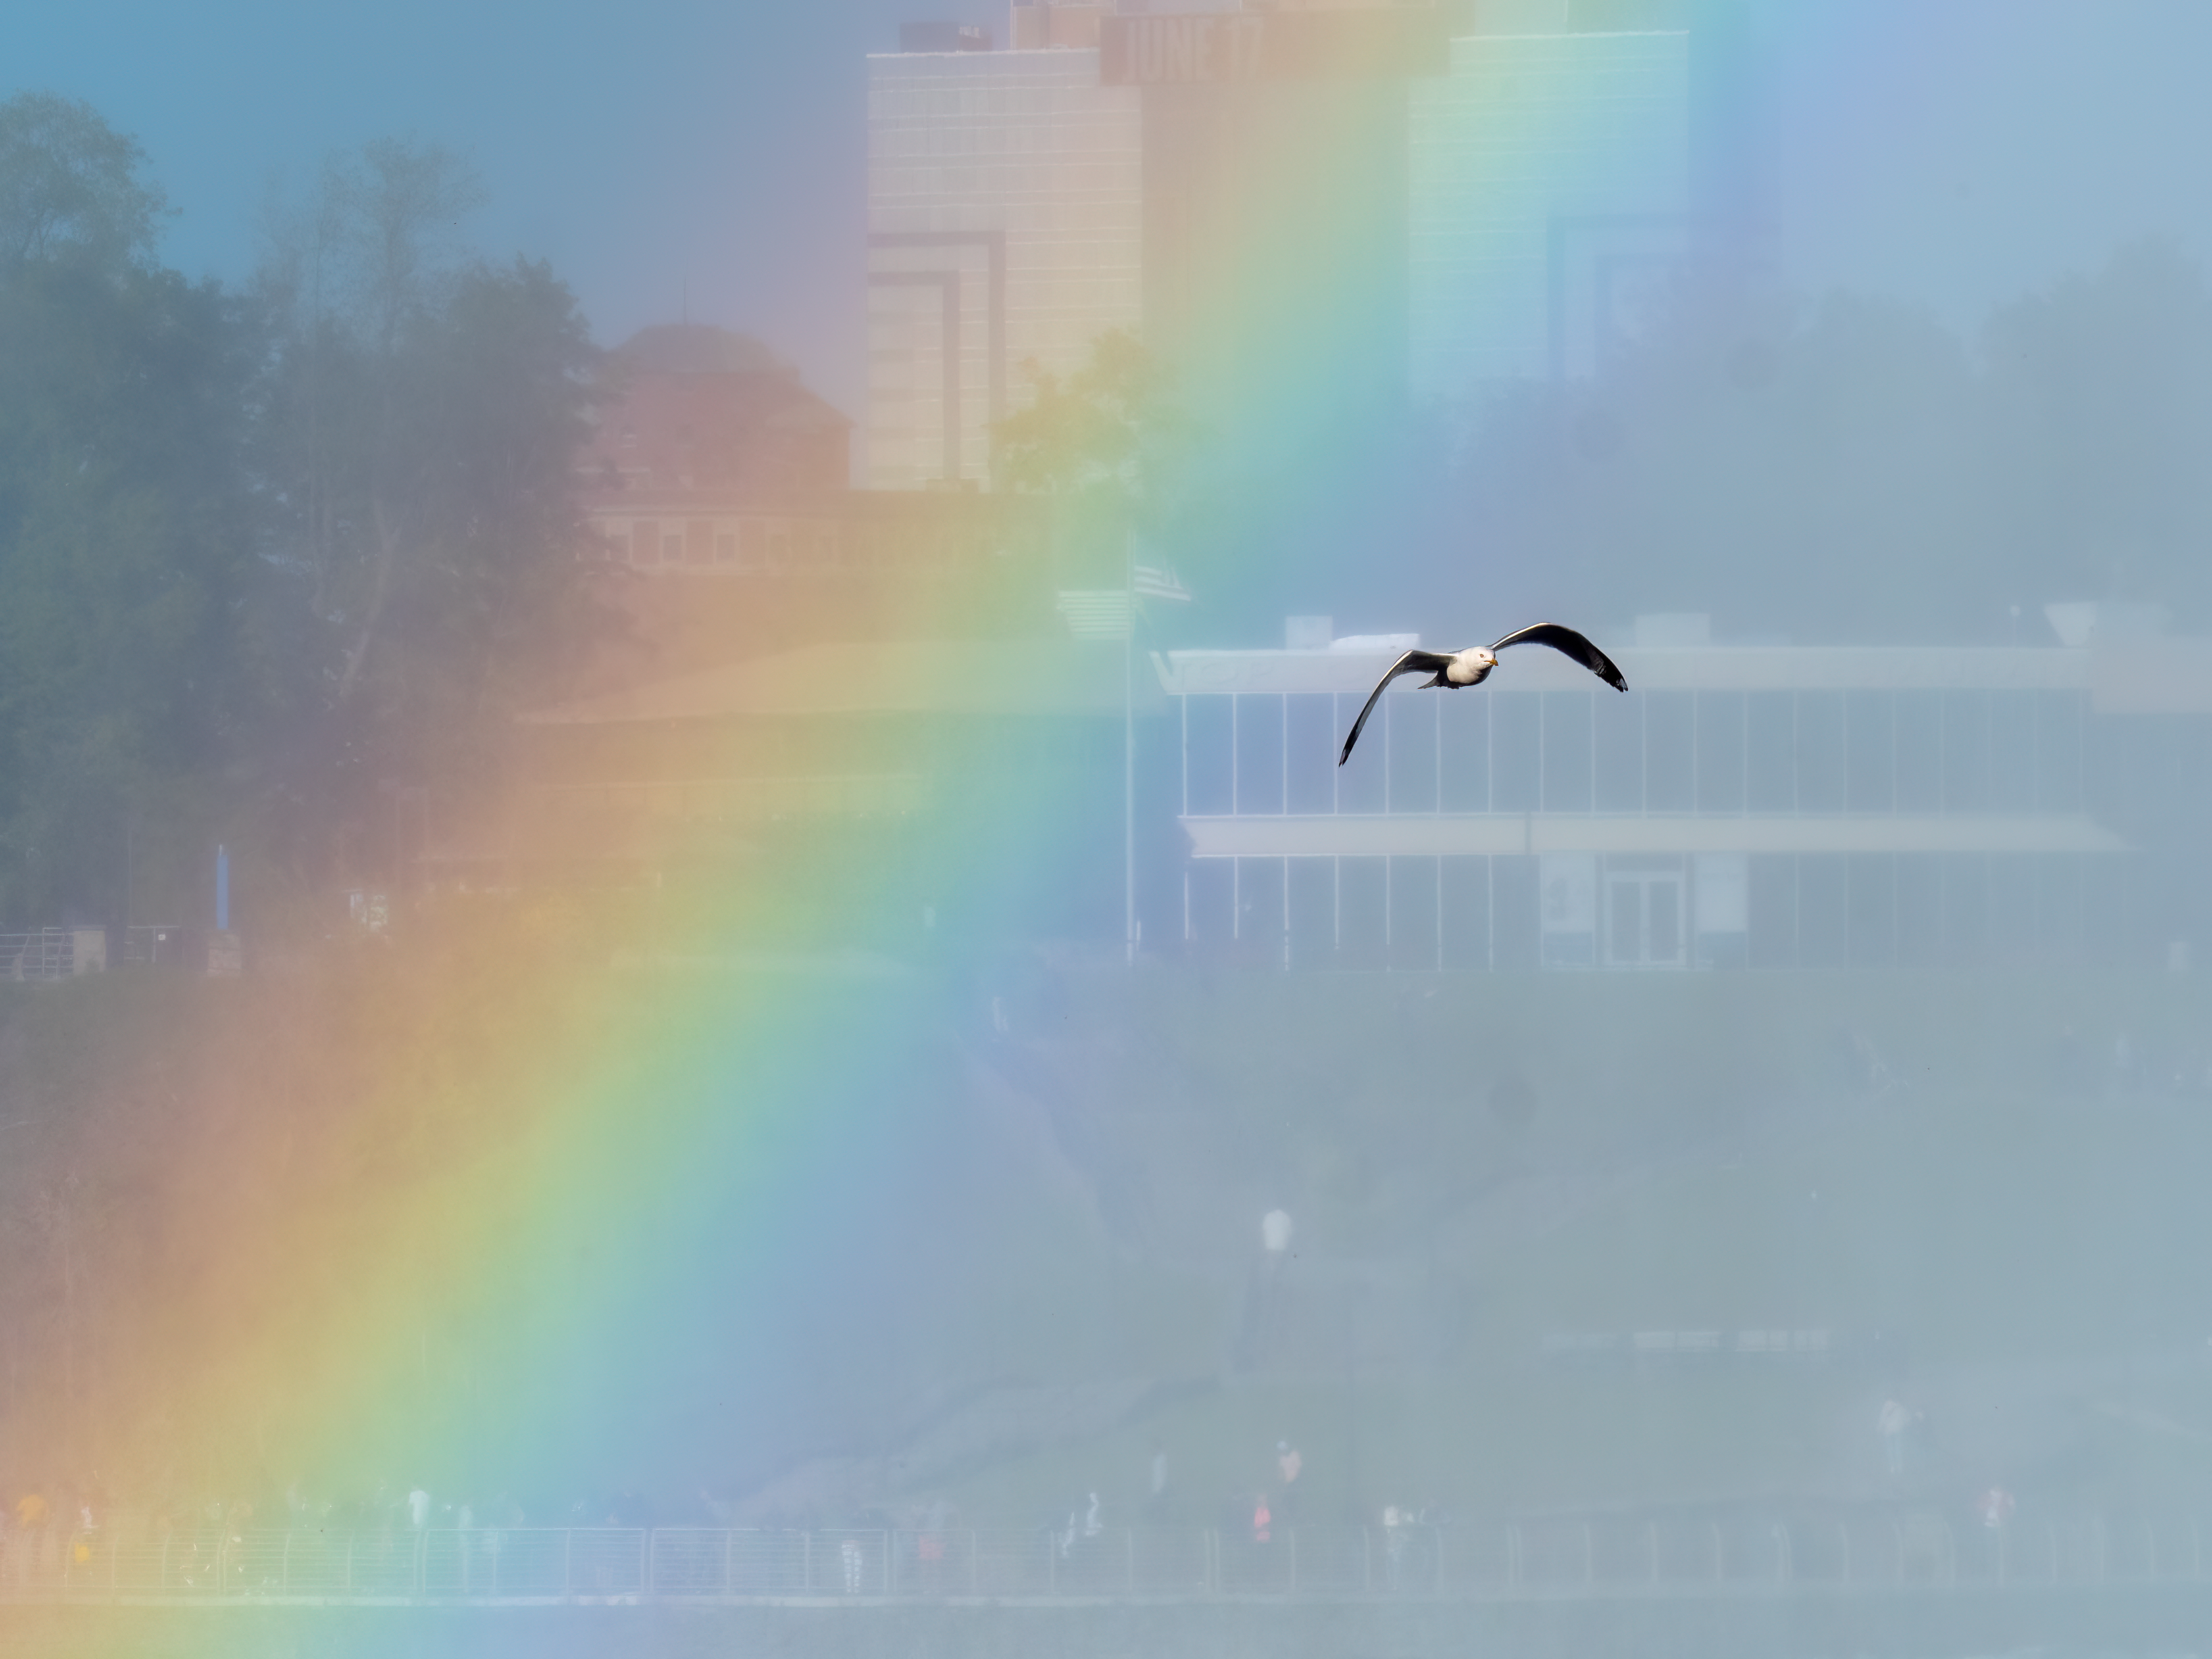 General 4608x3456 sky seagulls nature photography skyscape rainbows animals flying wings birds colorful